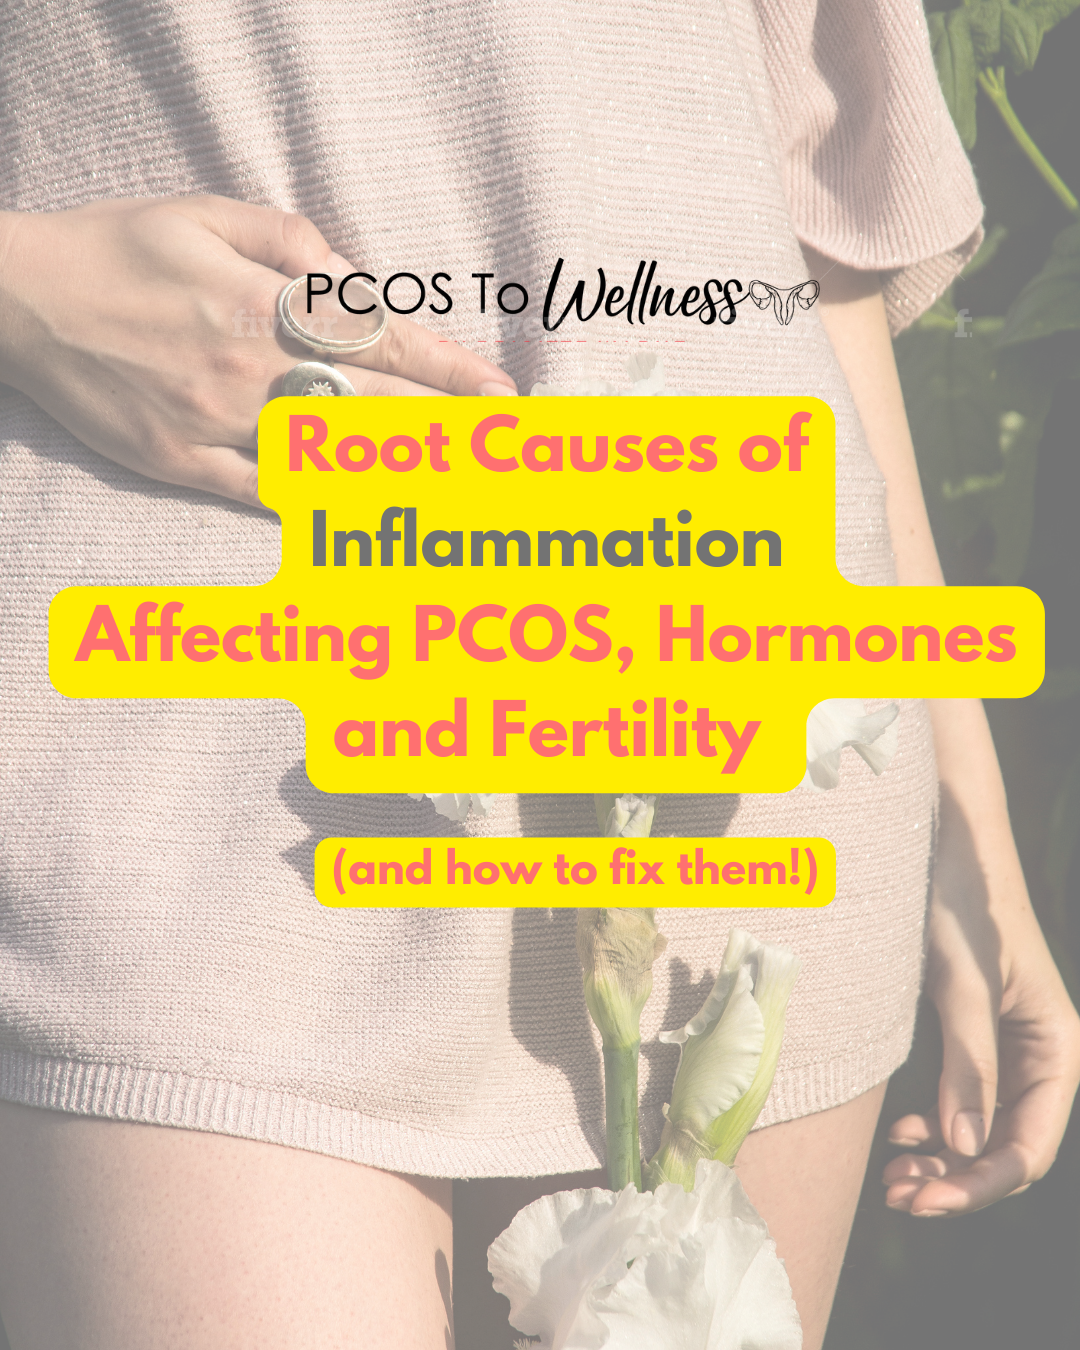 Root Causes of Inflammation Affecting PCOS, Hormones and Fertility (and how to fix them!)